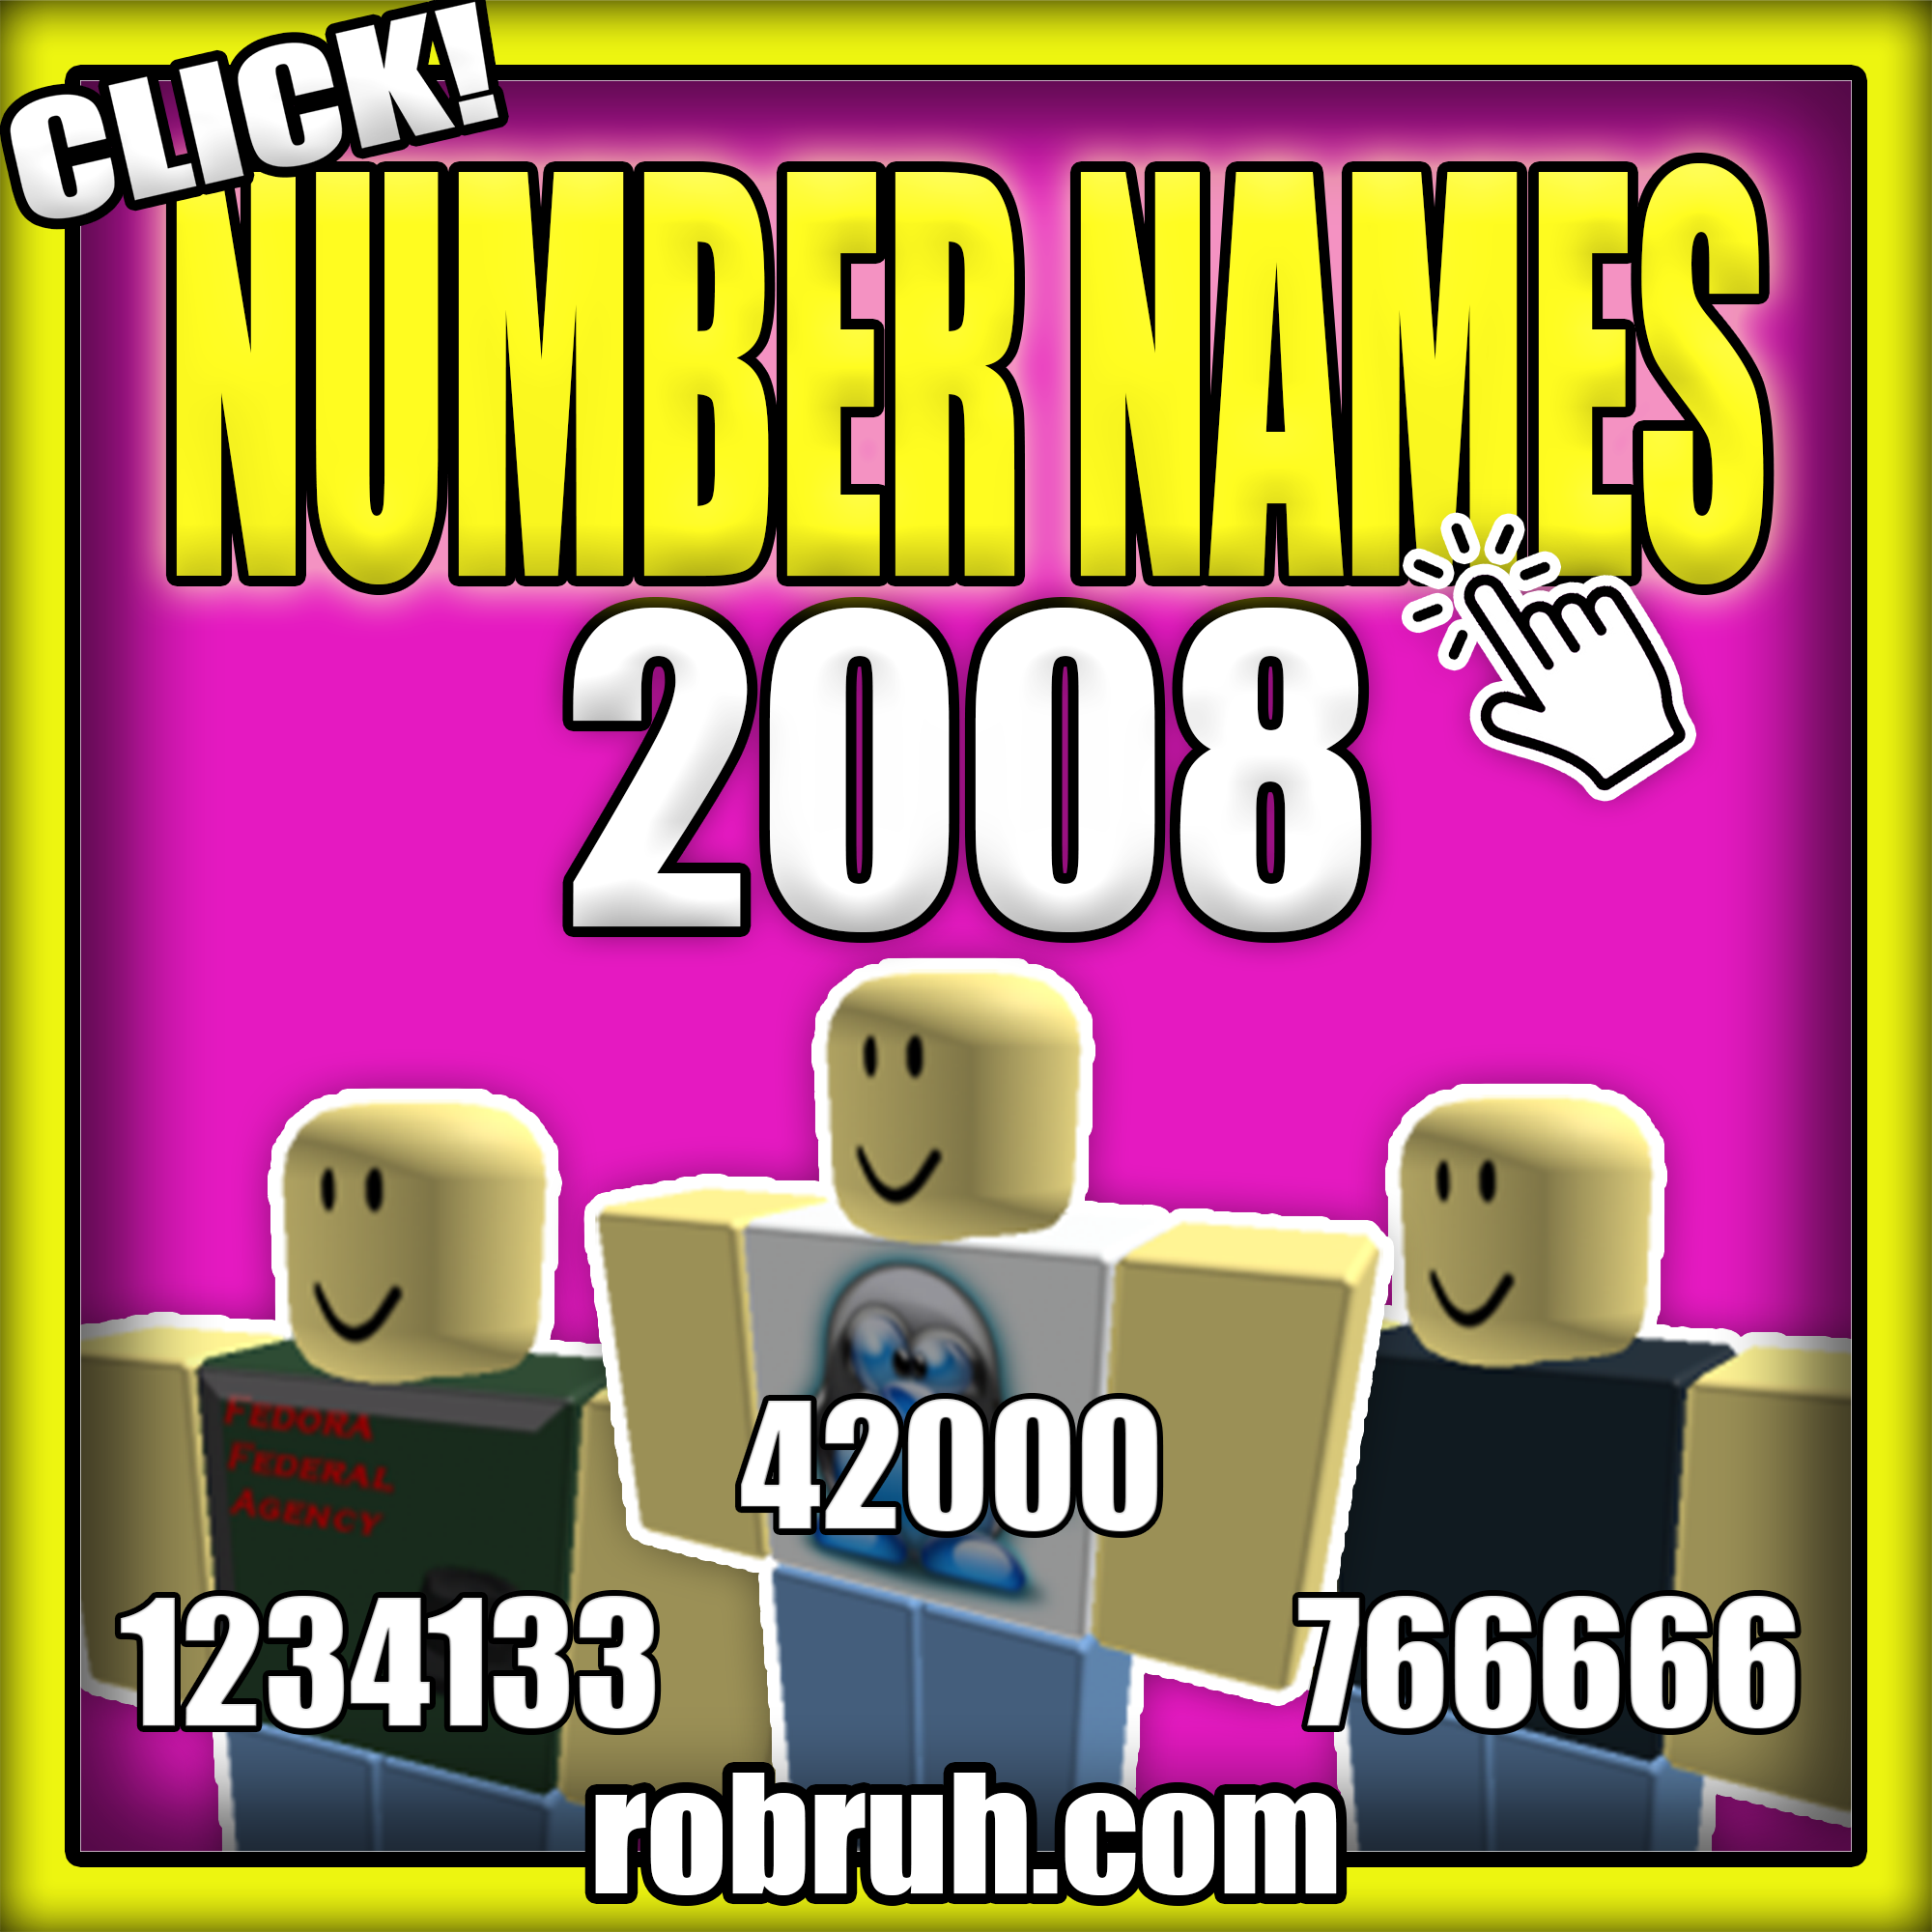 robruh ROBLOX account guaranteed to have a name that only has numbers!